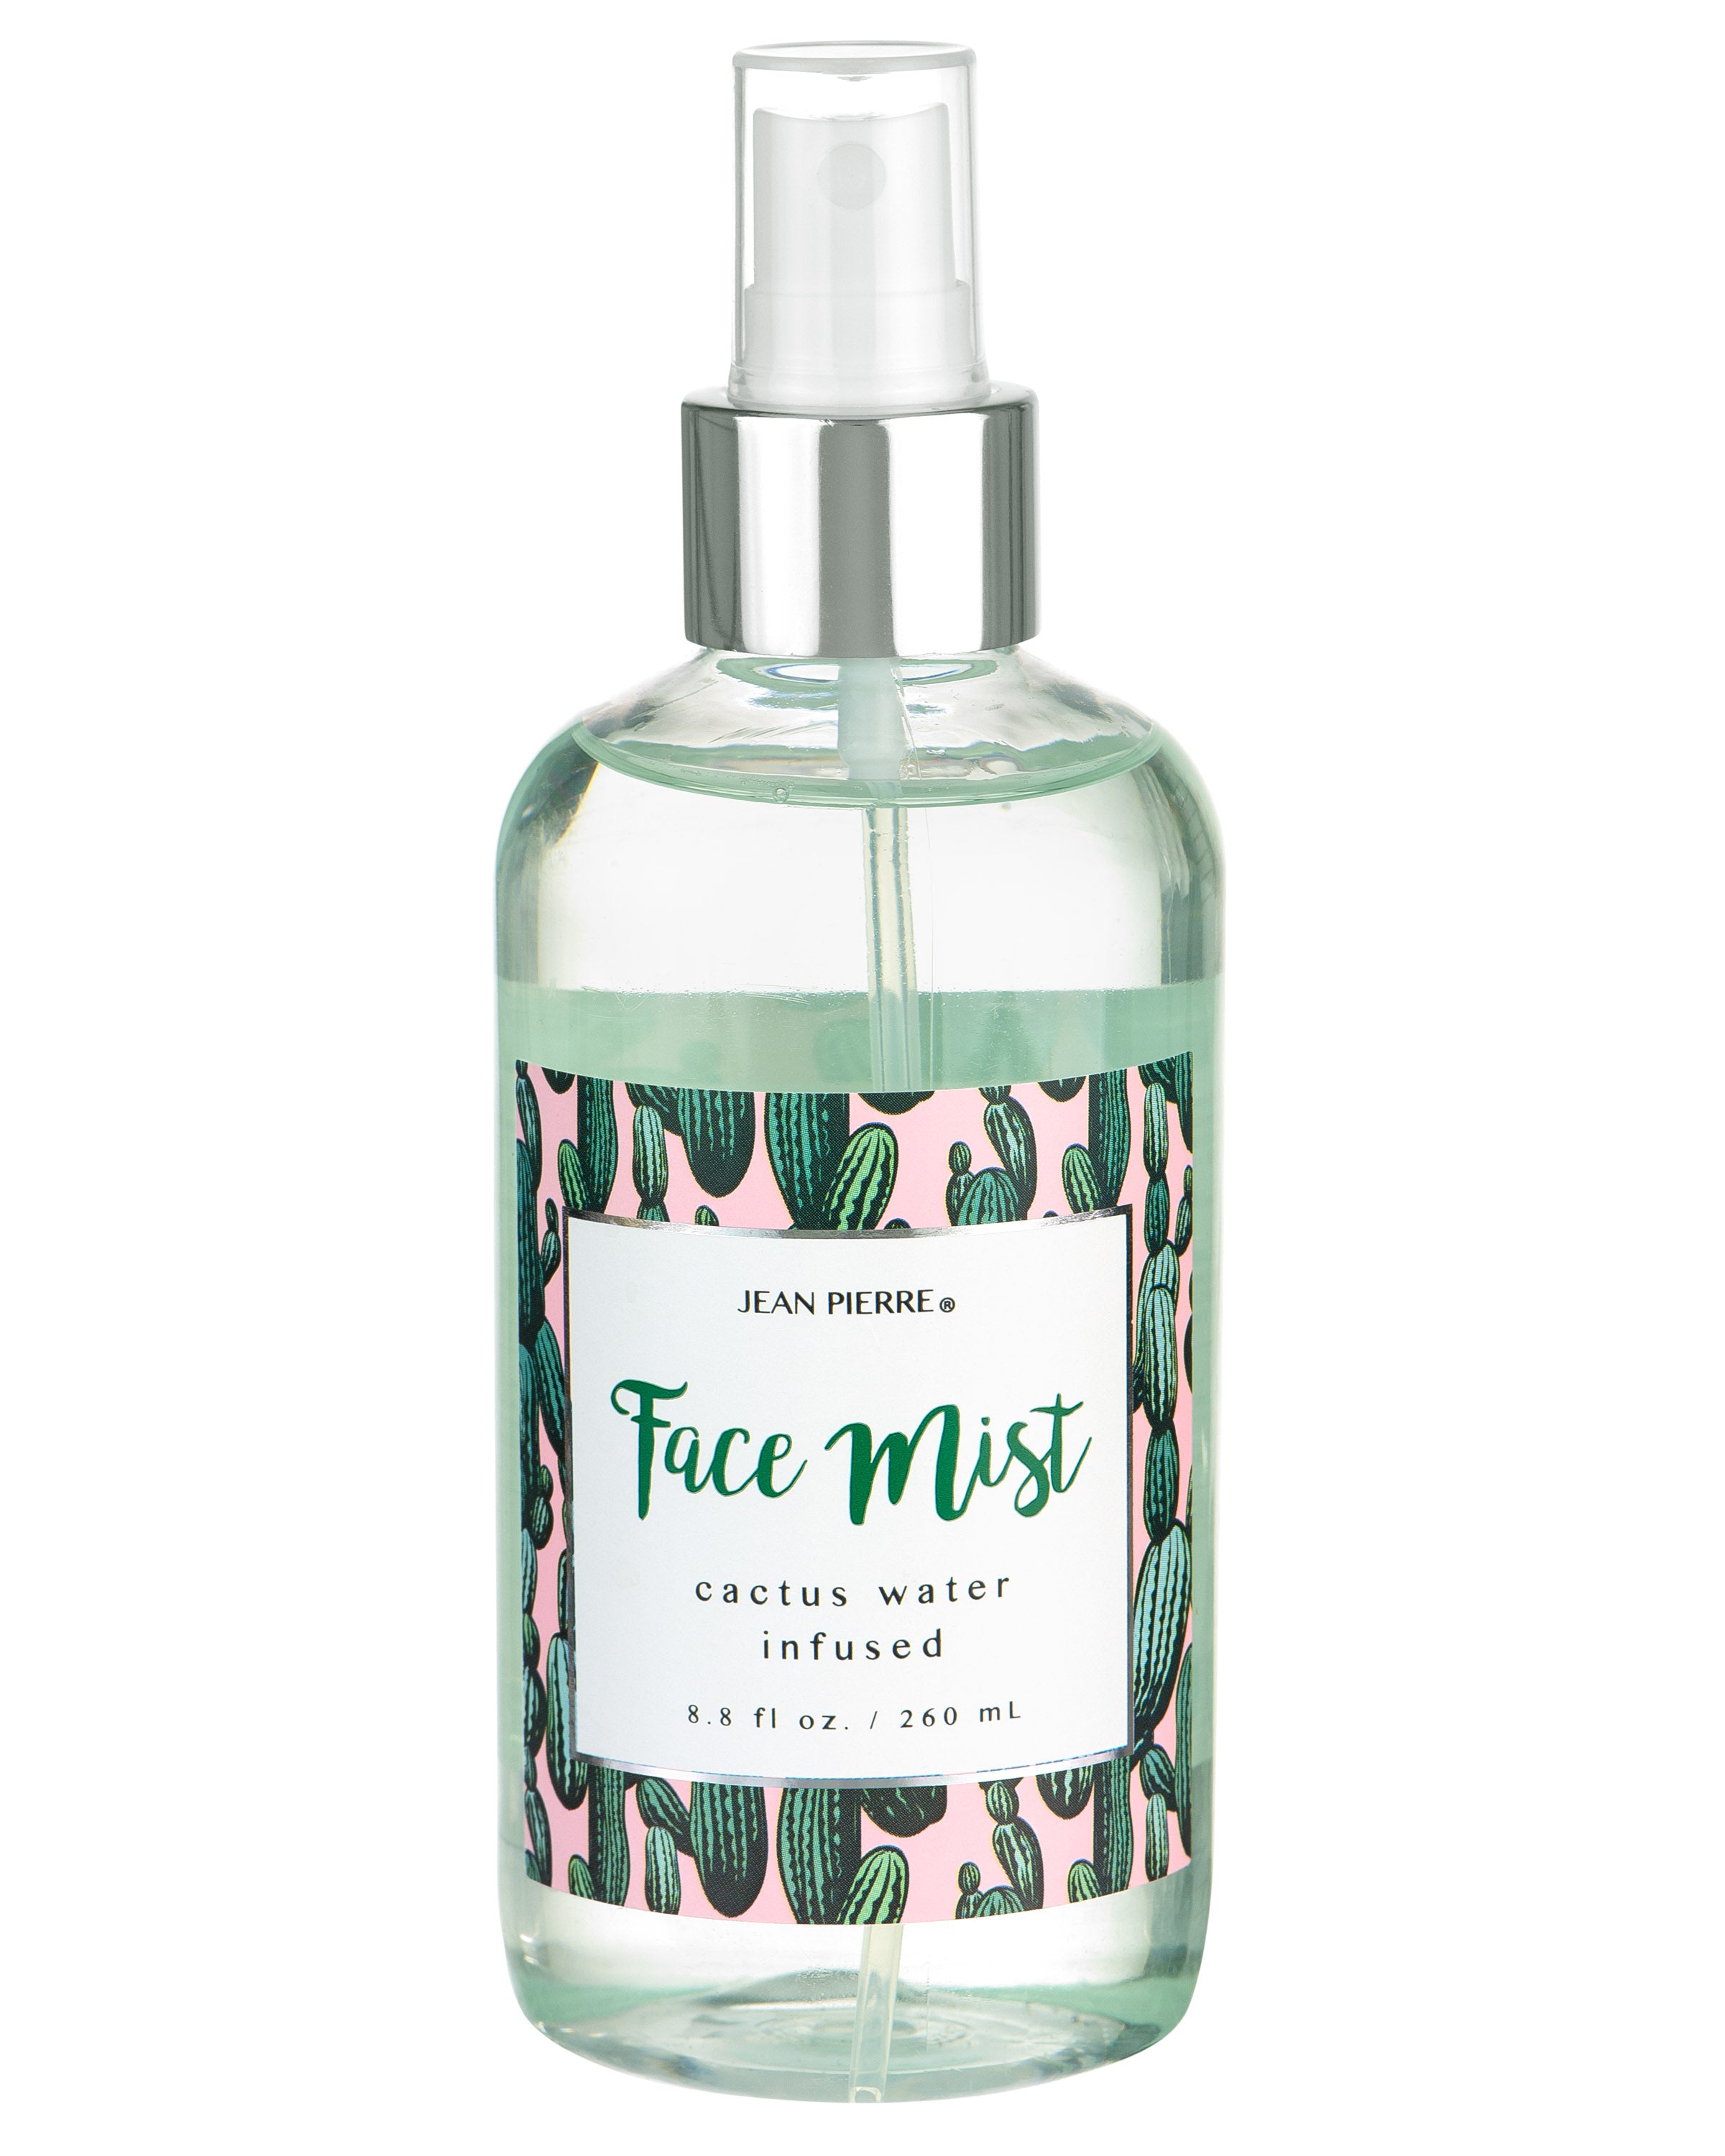 Cactus Water Infused Face Mist